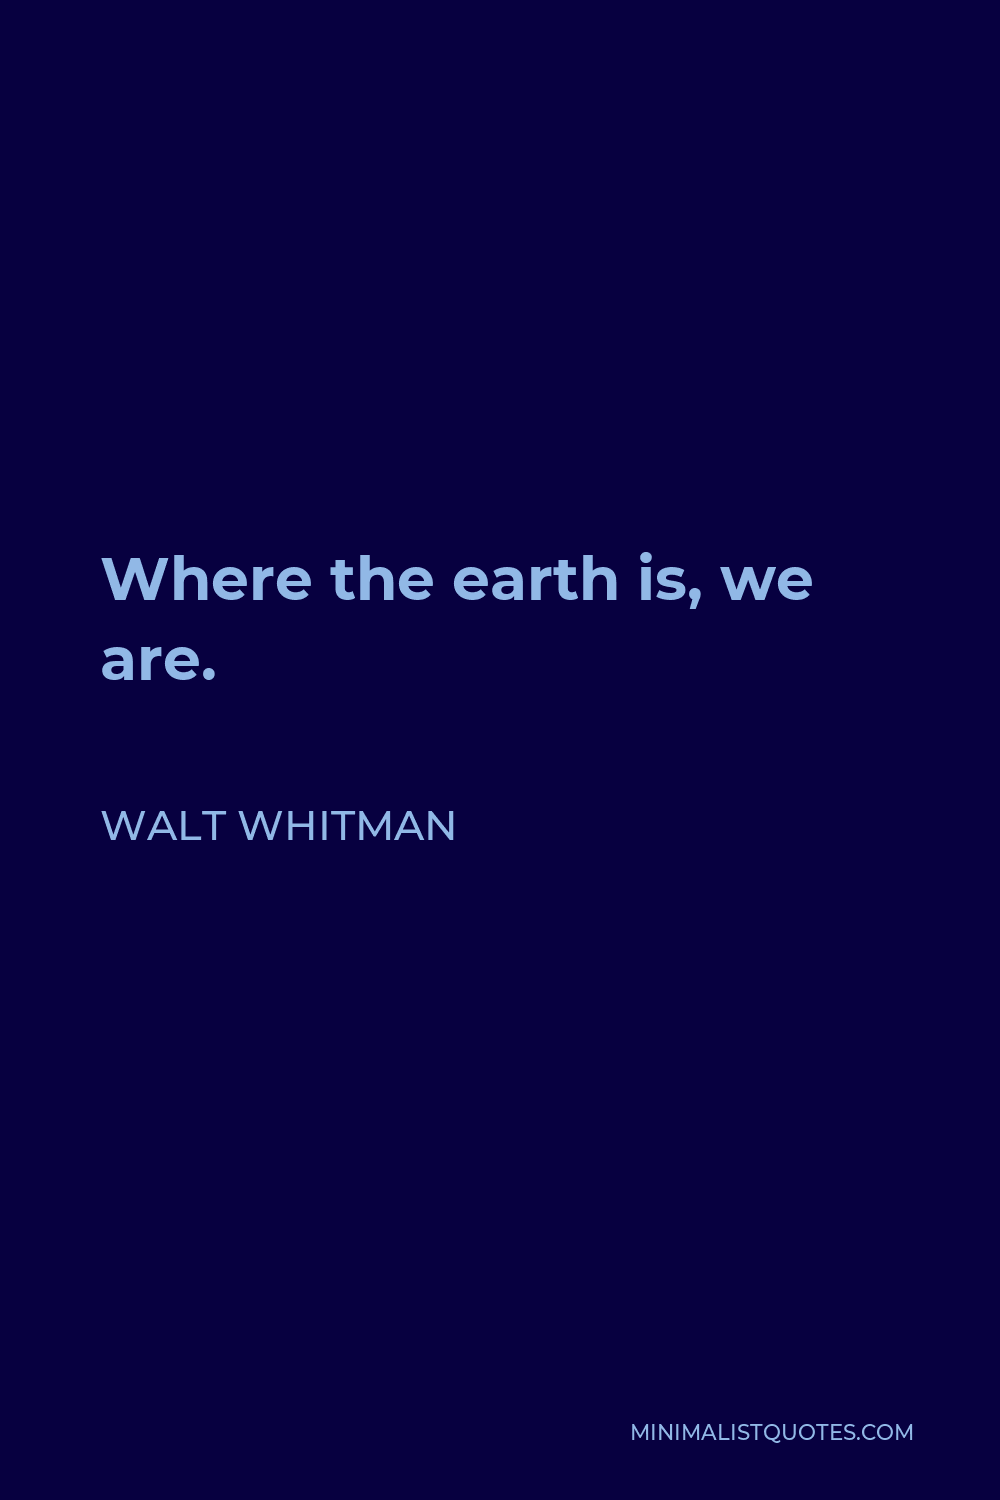 Walt Whitman Quote - Where the earth is, we are.